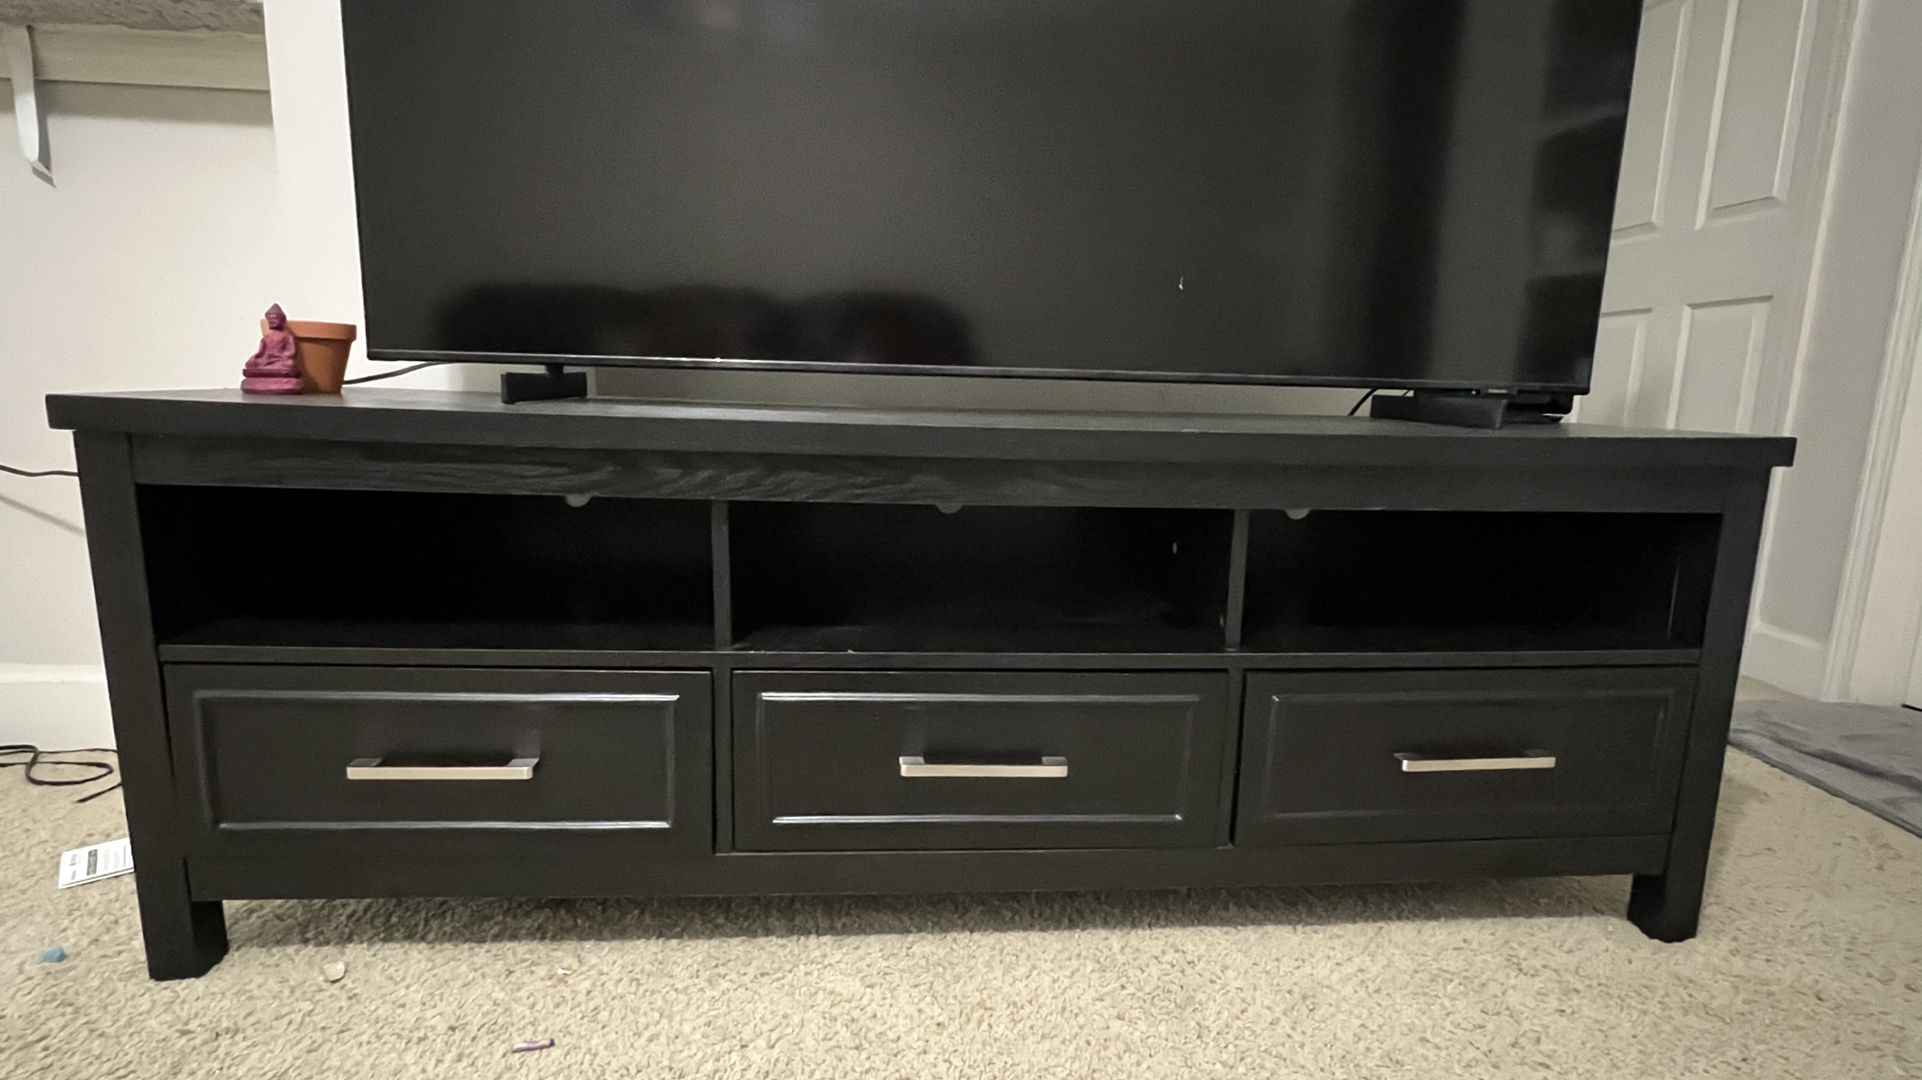 65-70 Inch Tv Stand